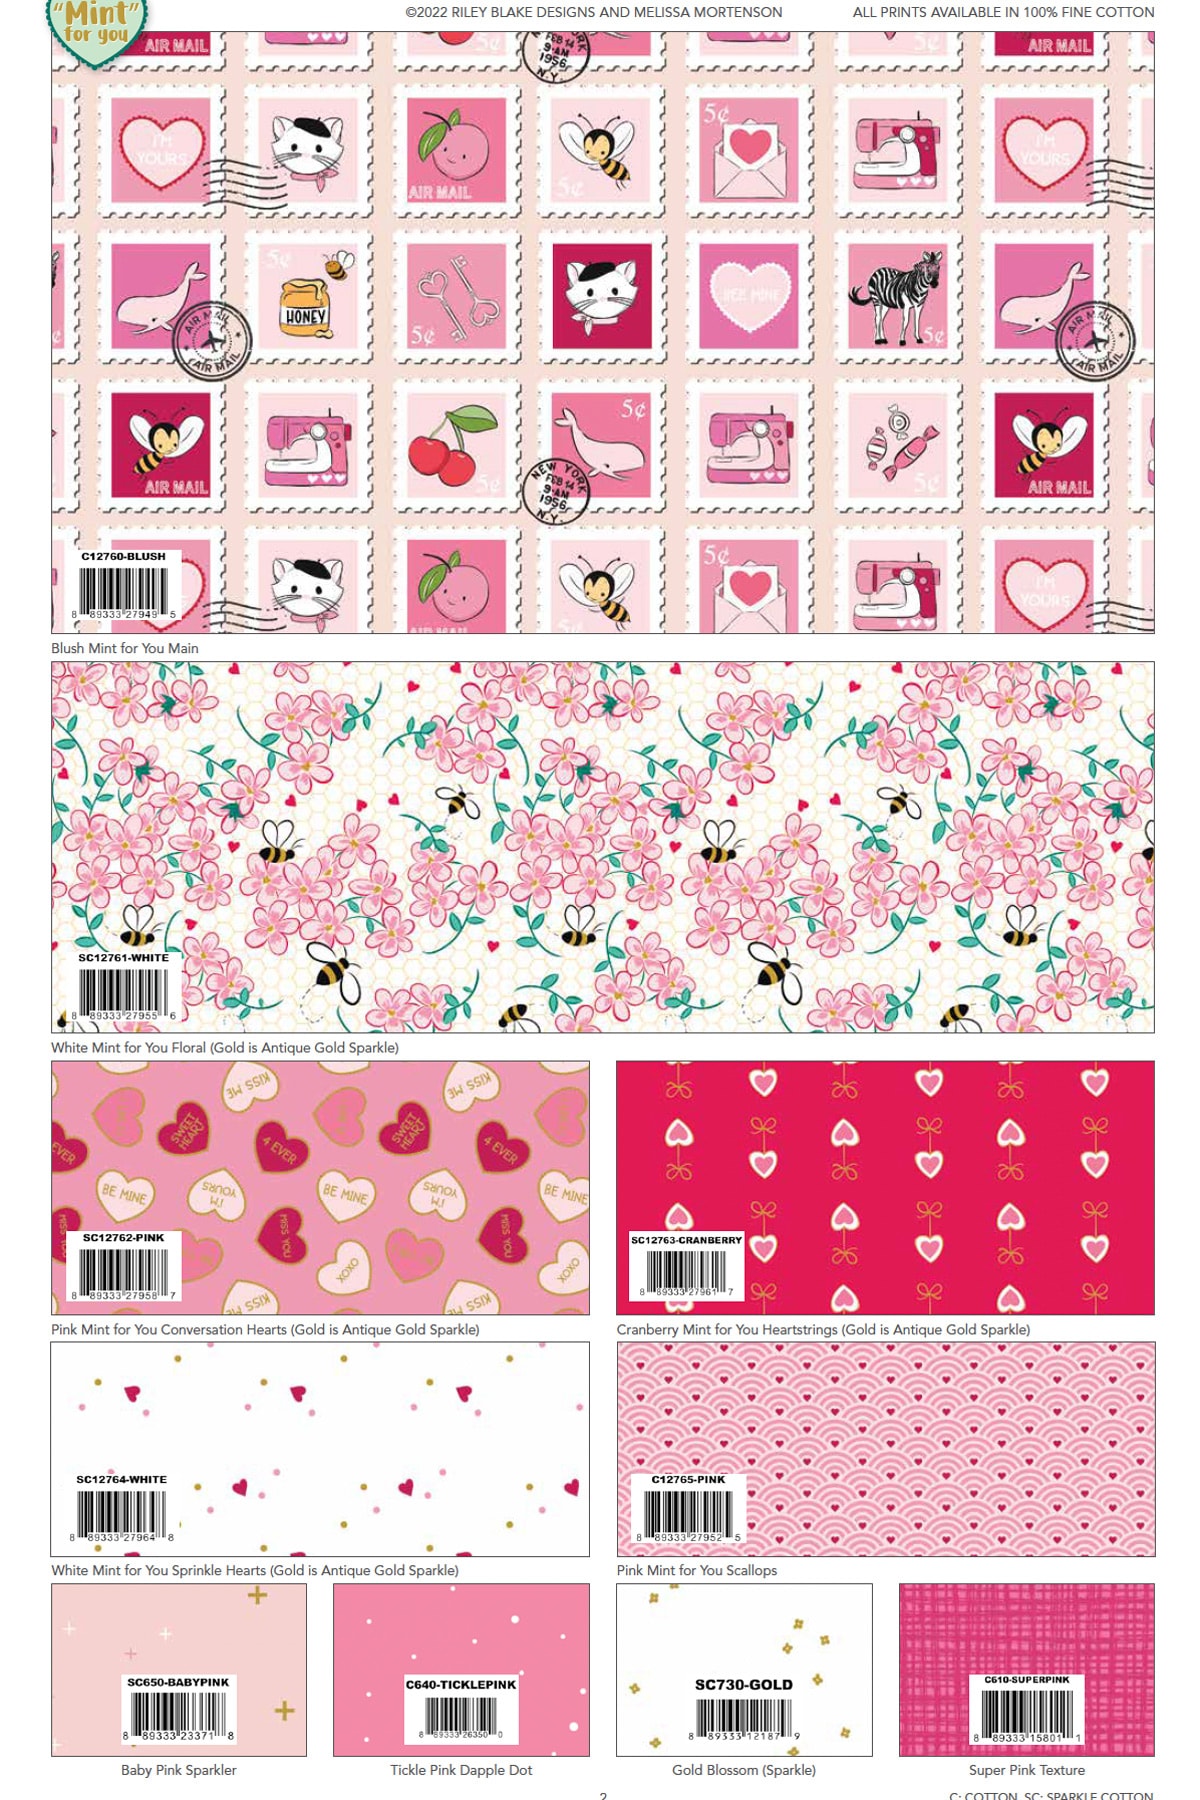 grid showing a variety of fabric prints in pink, mint and red